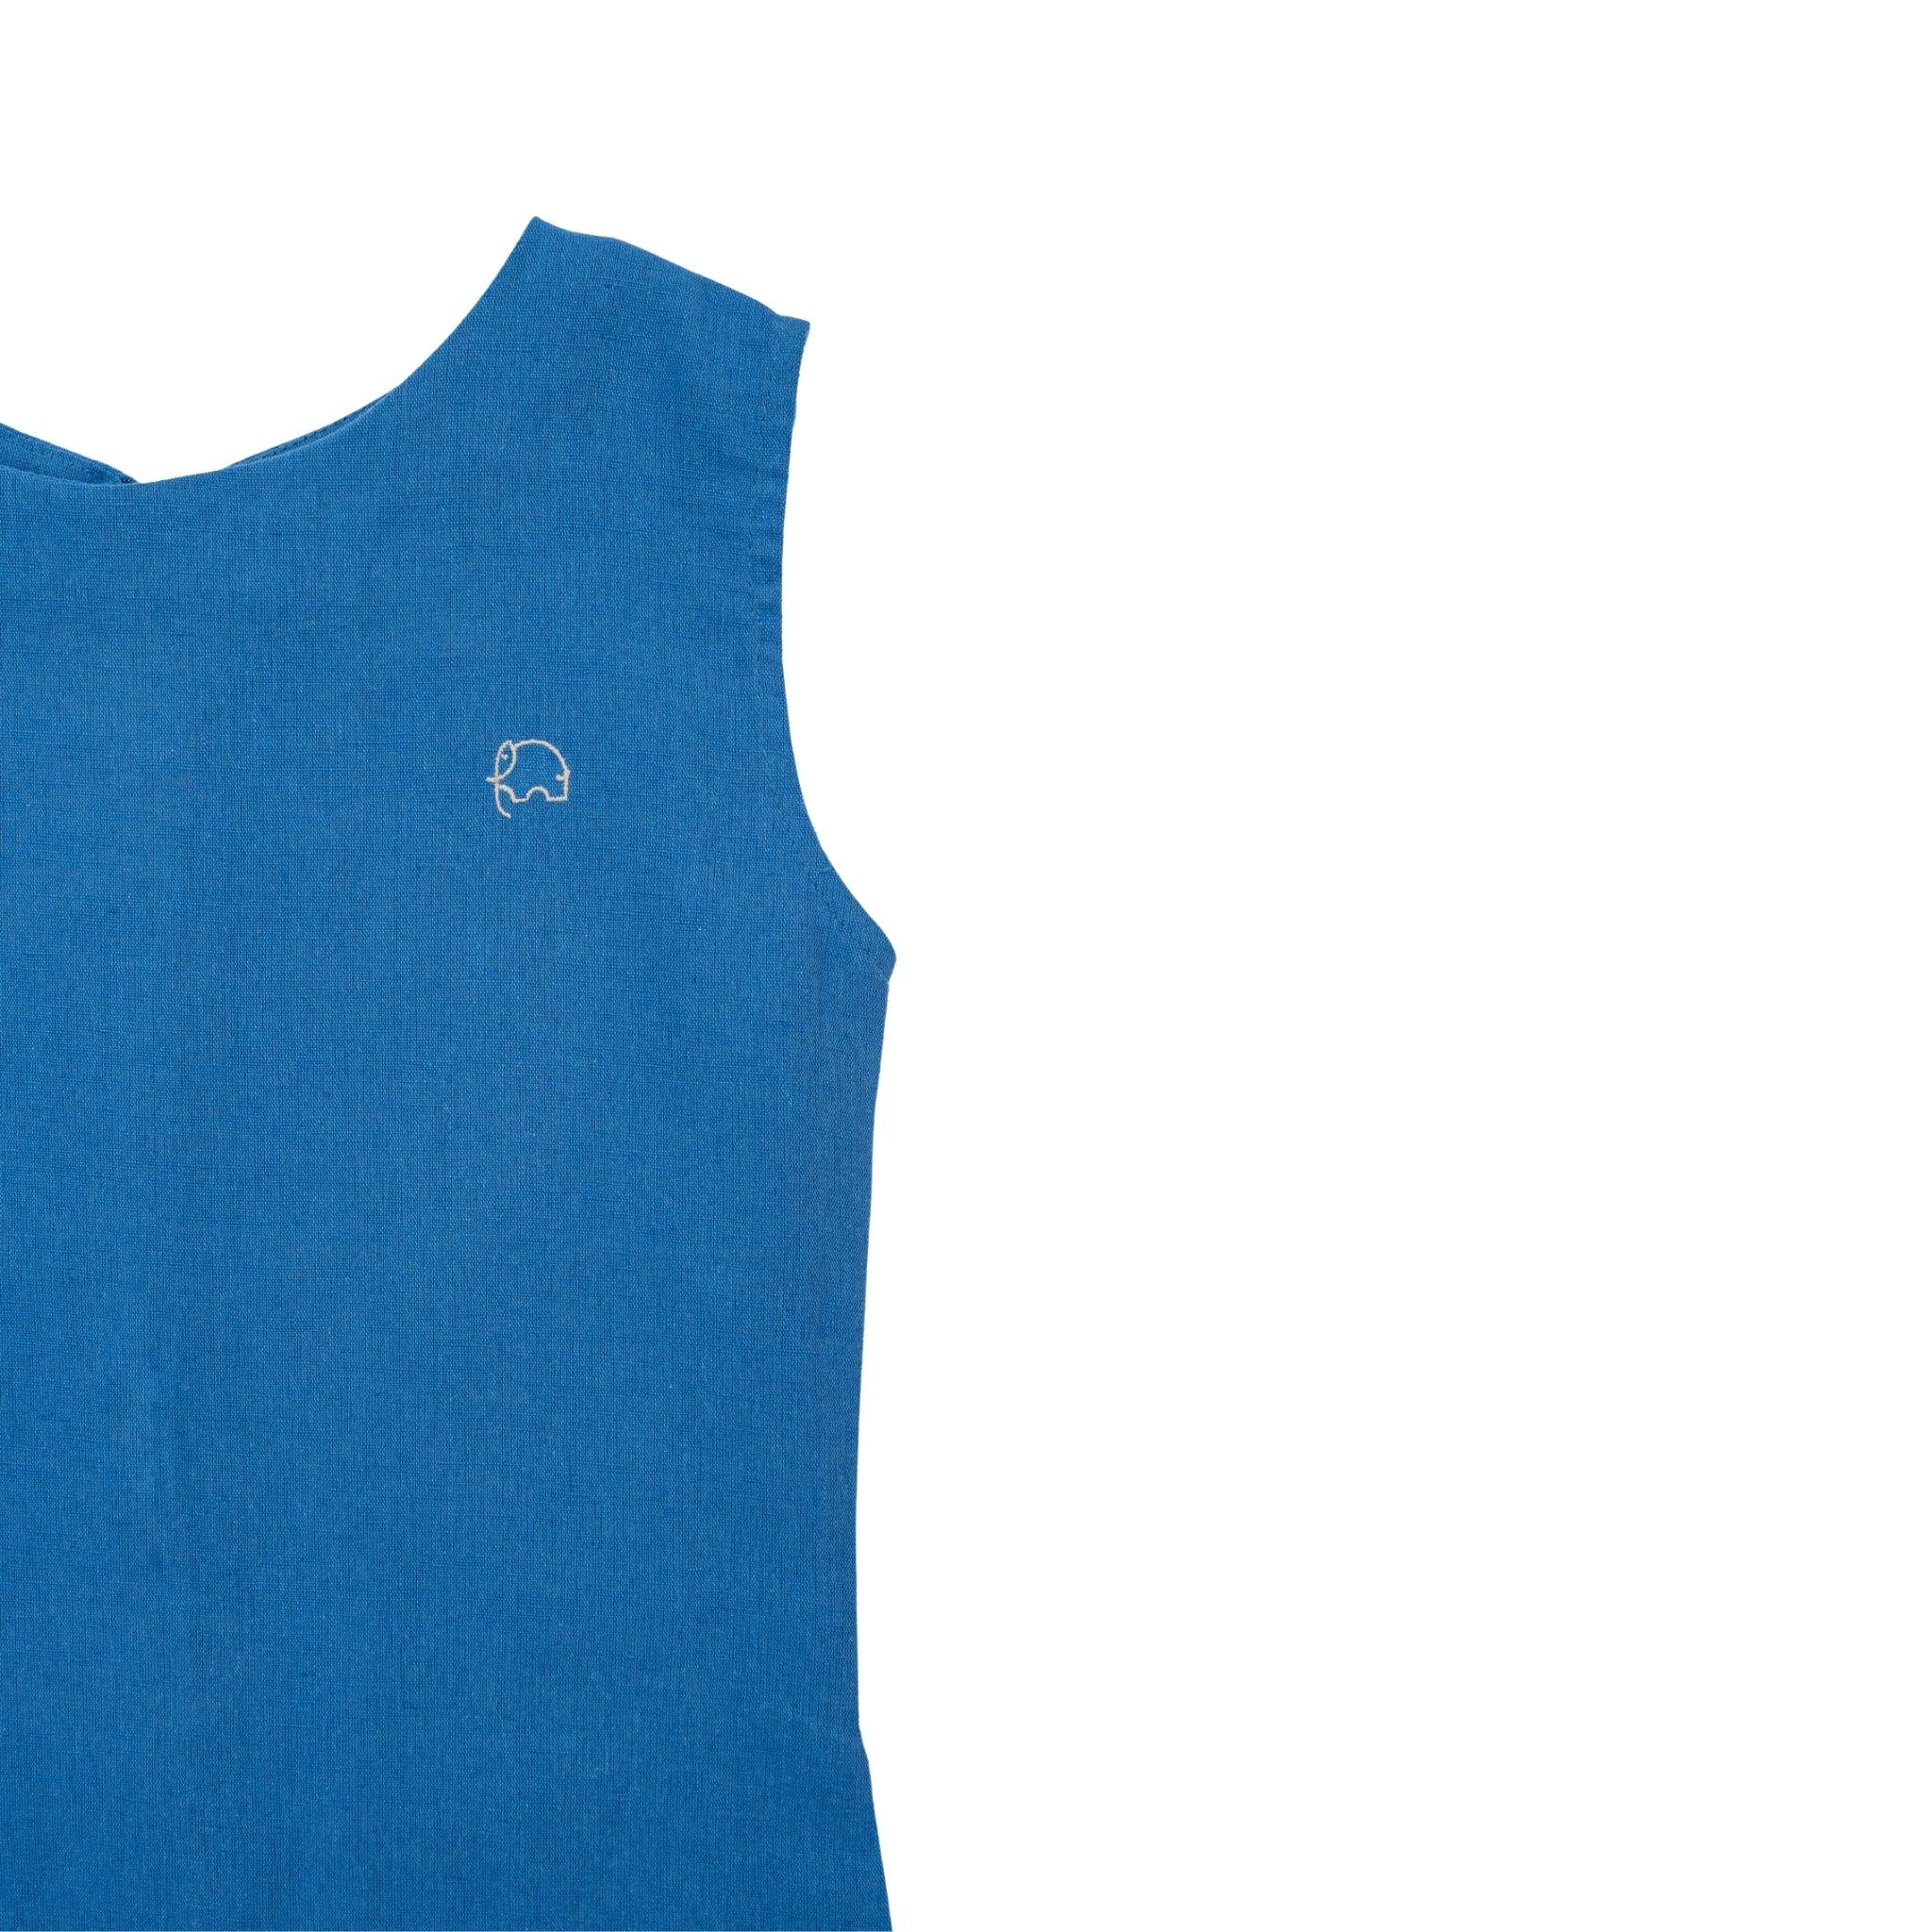 Karee blue sleeveless t-shirt with a small white elephant logo on the upper left side, displayed against a white background.